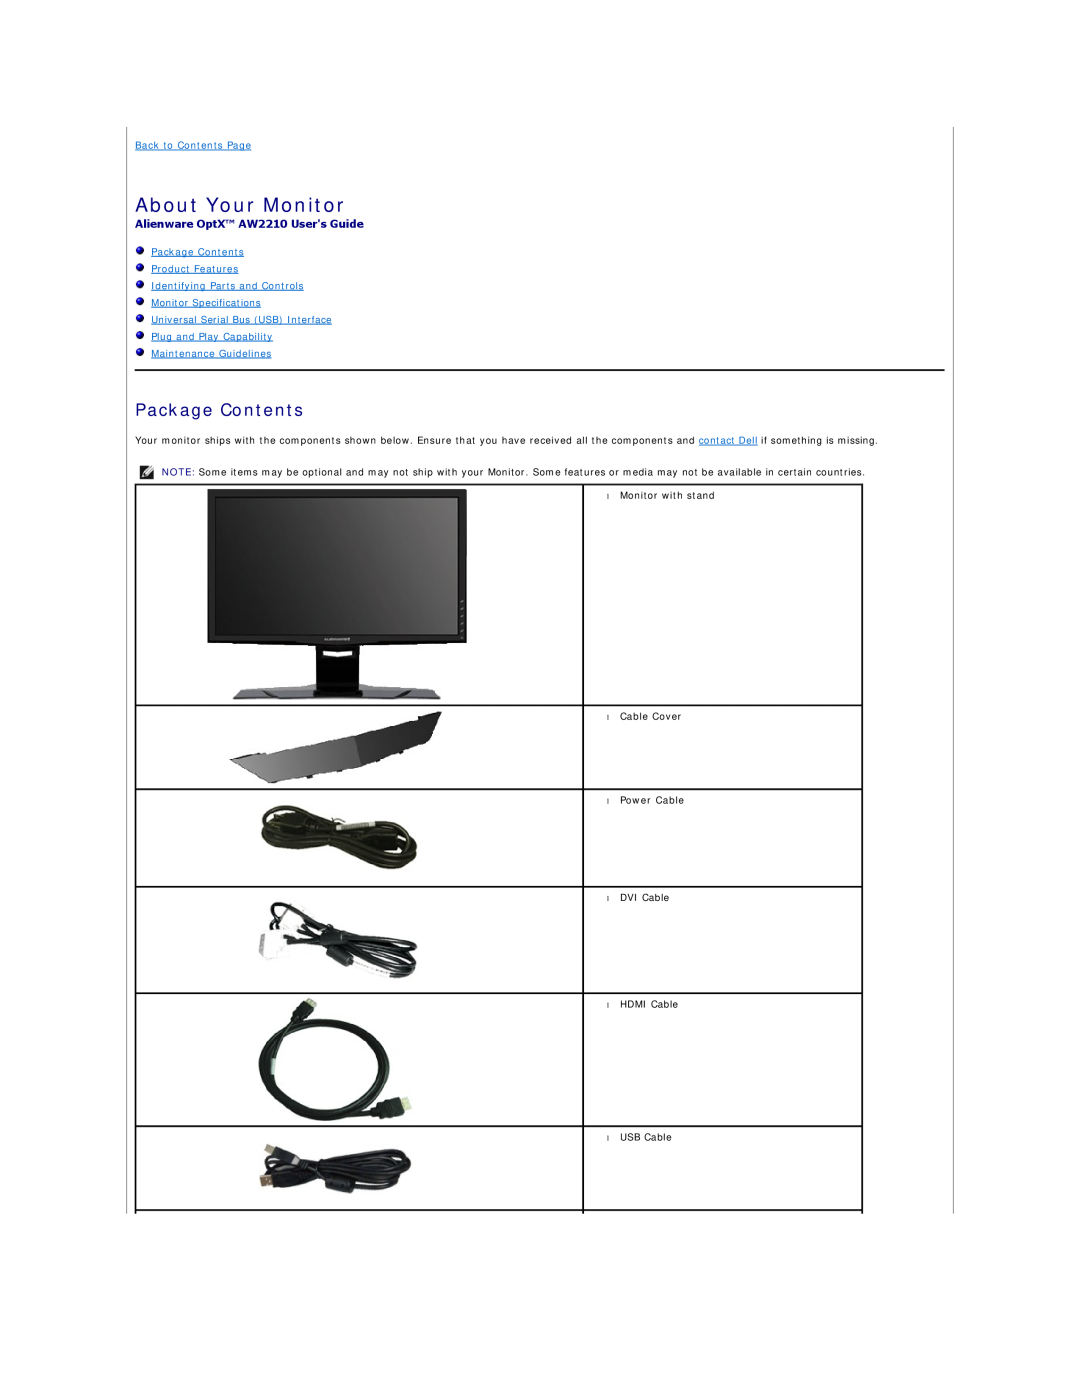 Dell AW2210T appendix About Your Monitor, Package Contents, Alienware OptX AW2210 Users Guide, Back to Contents Page 